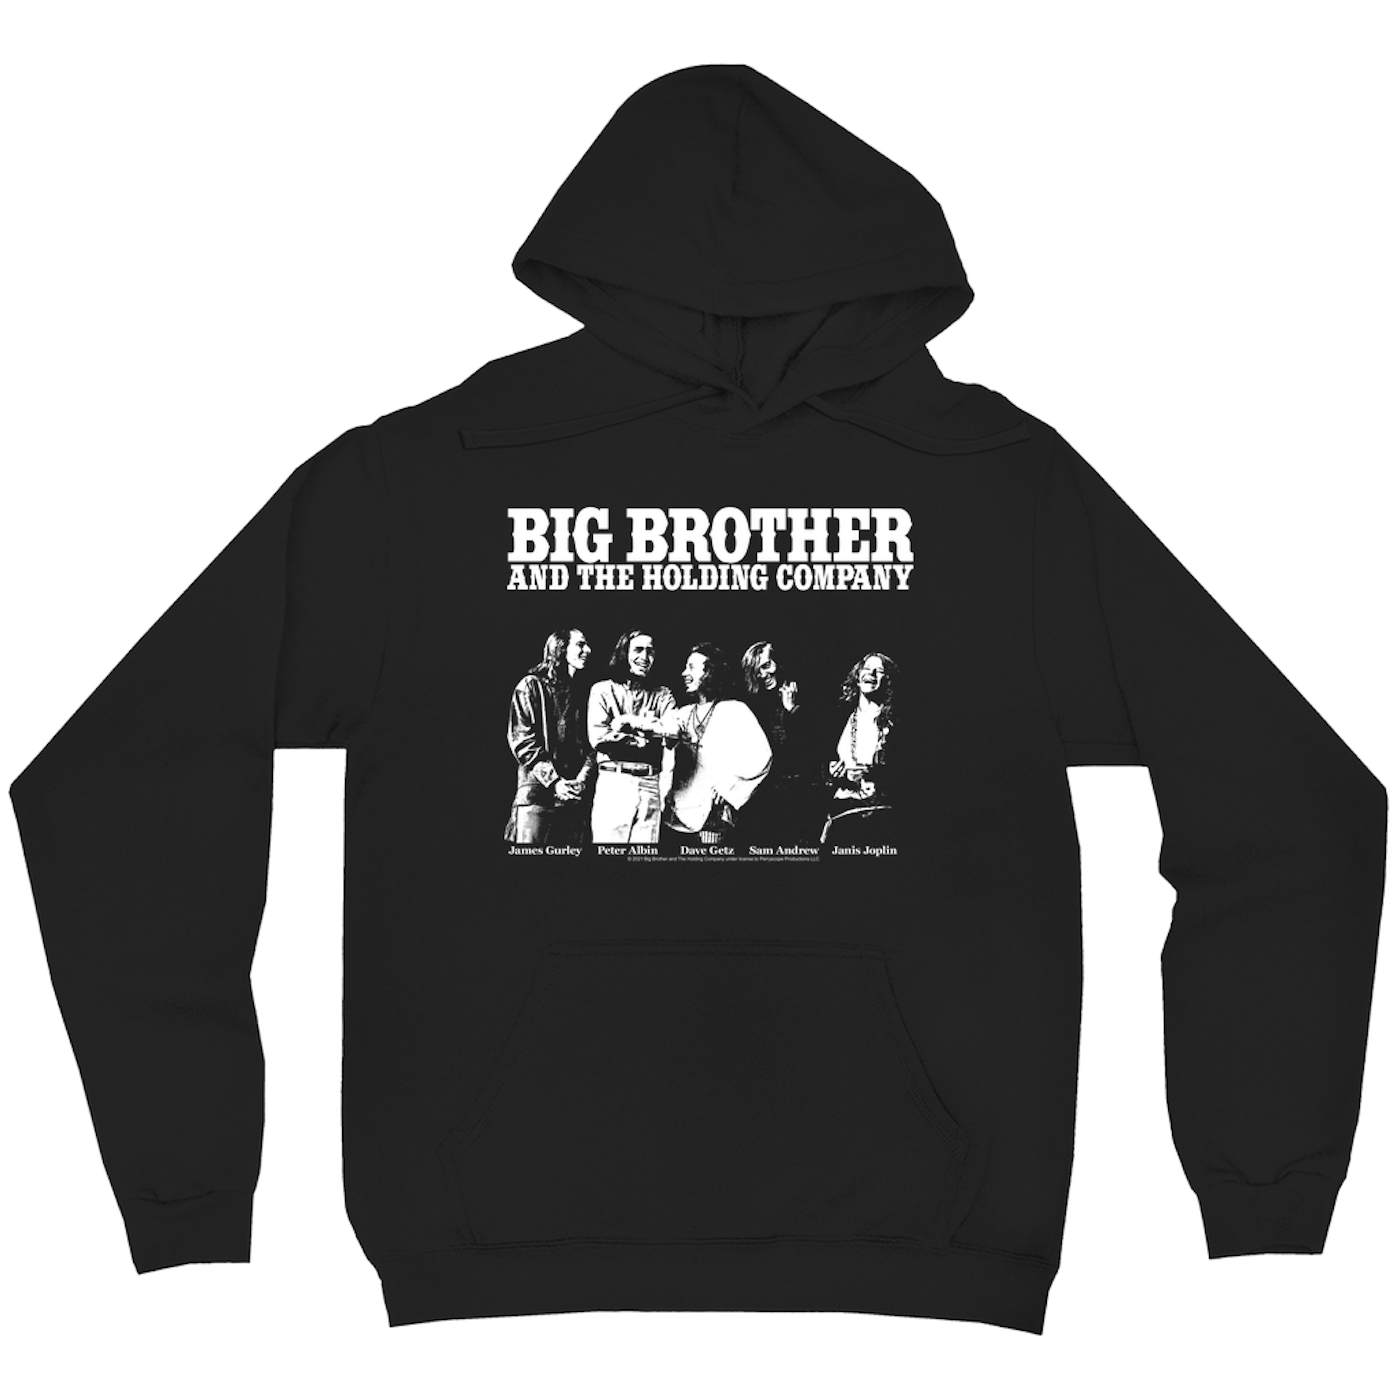 Big Brother & The Holding Company Big Brother and The Holding Co. Hoodie | Featuring Janis Joplin Black and White Photo Big Brother and The Holding Co. Hoodie (Merchbar Exclusive)